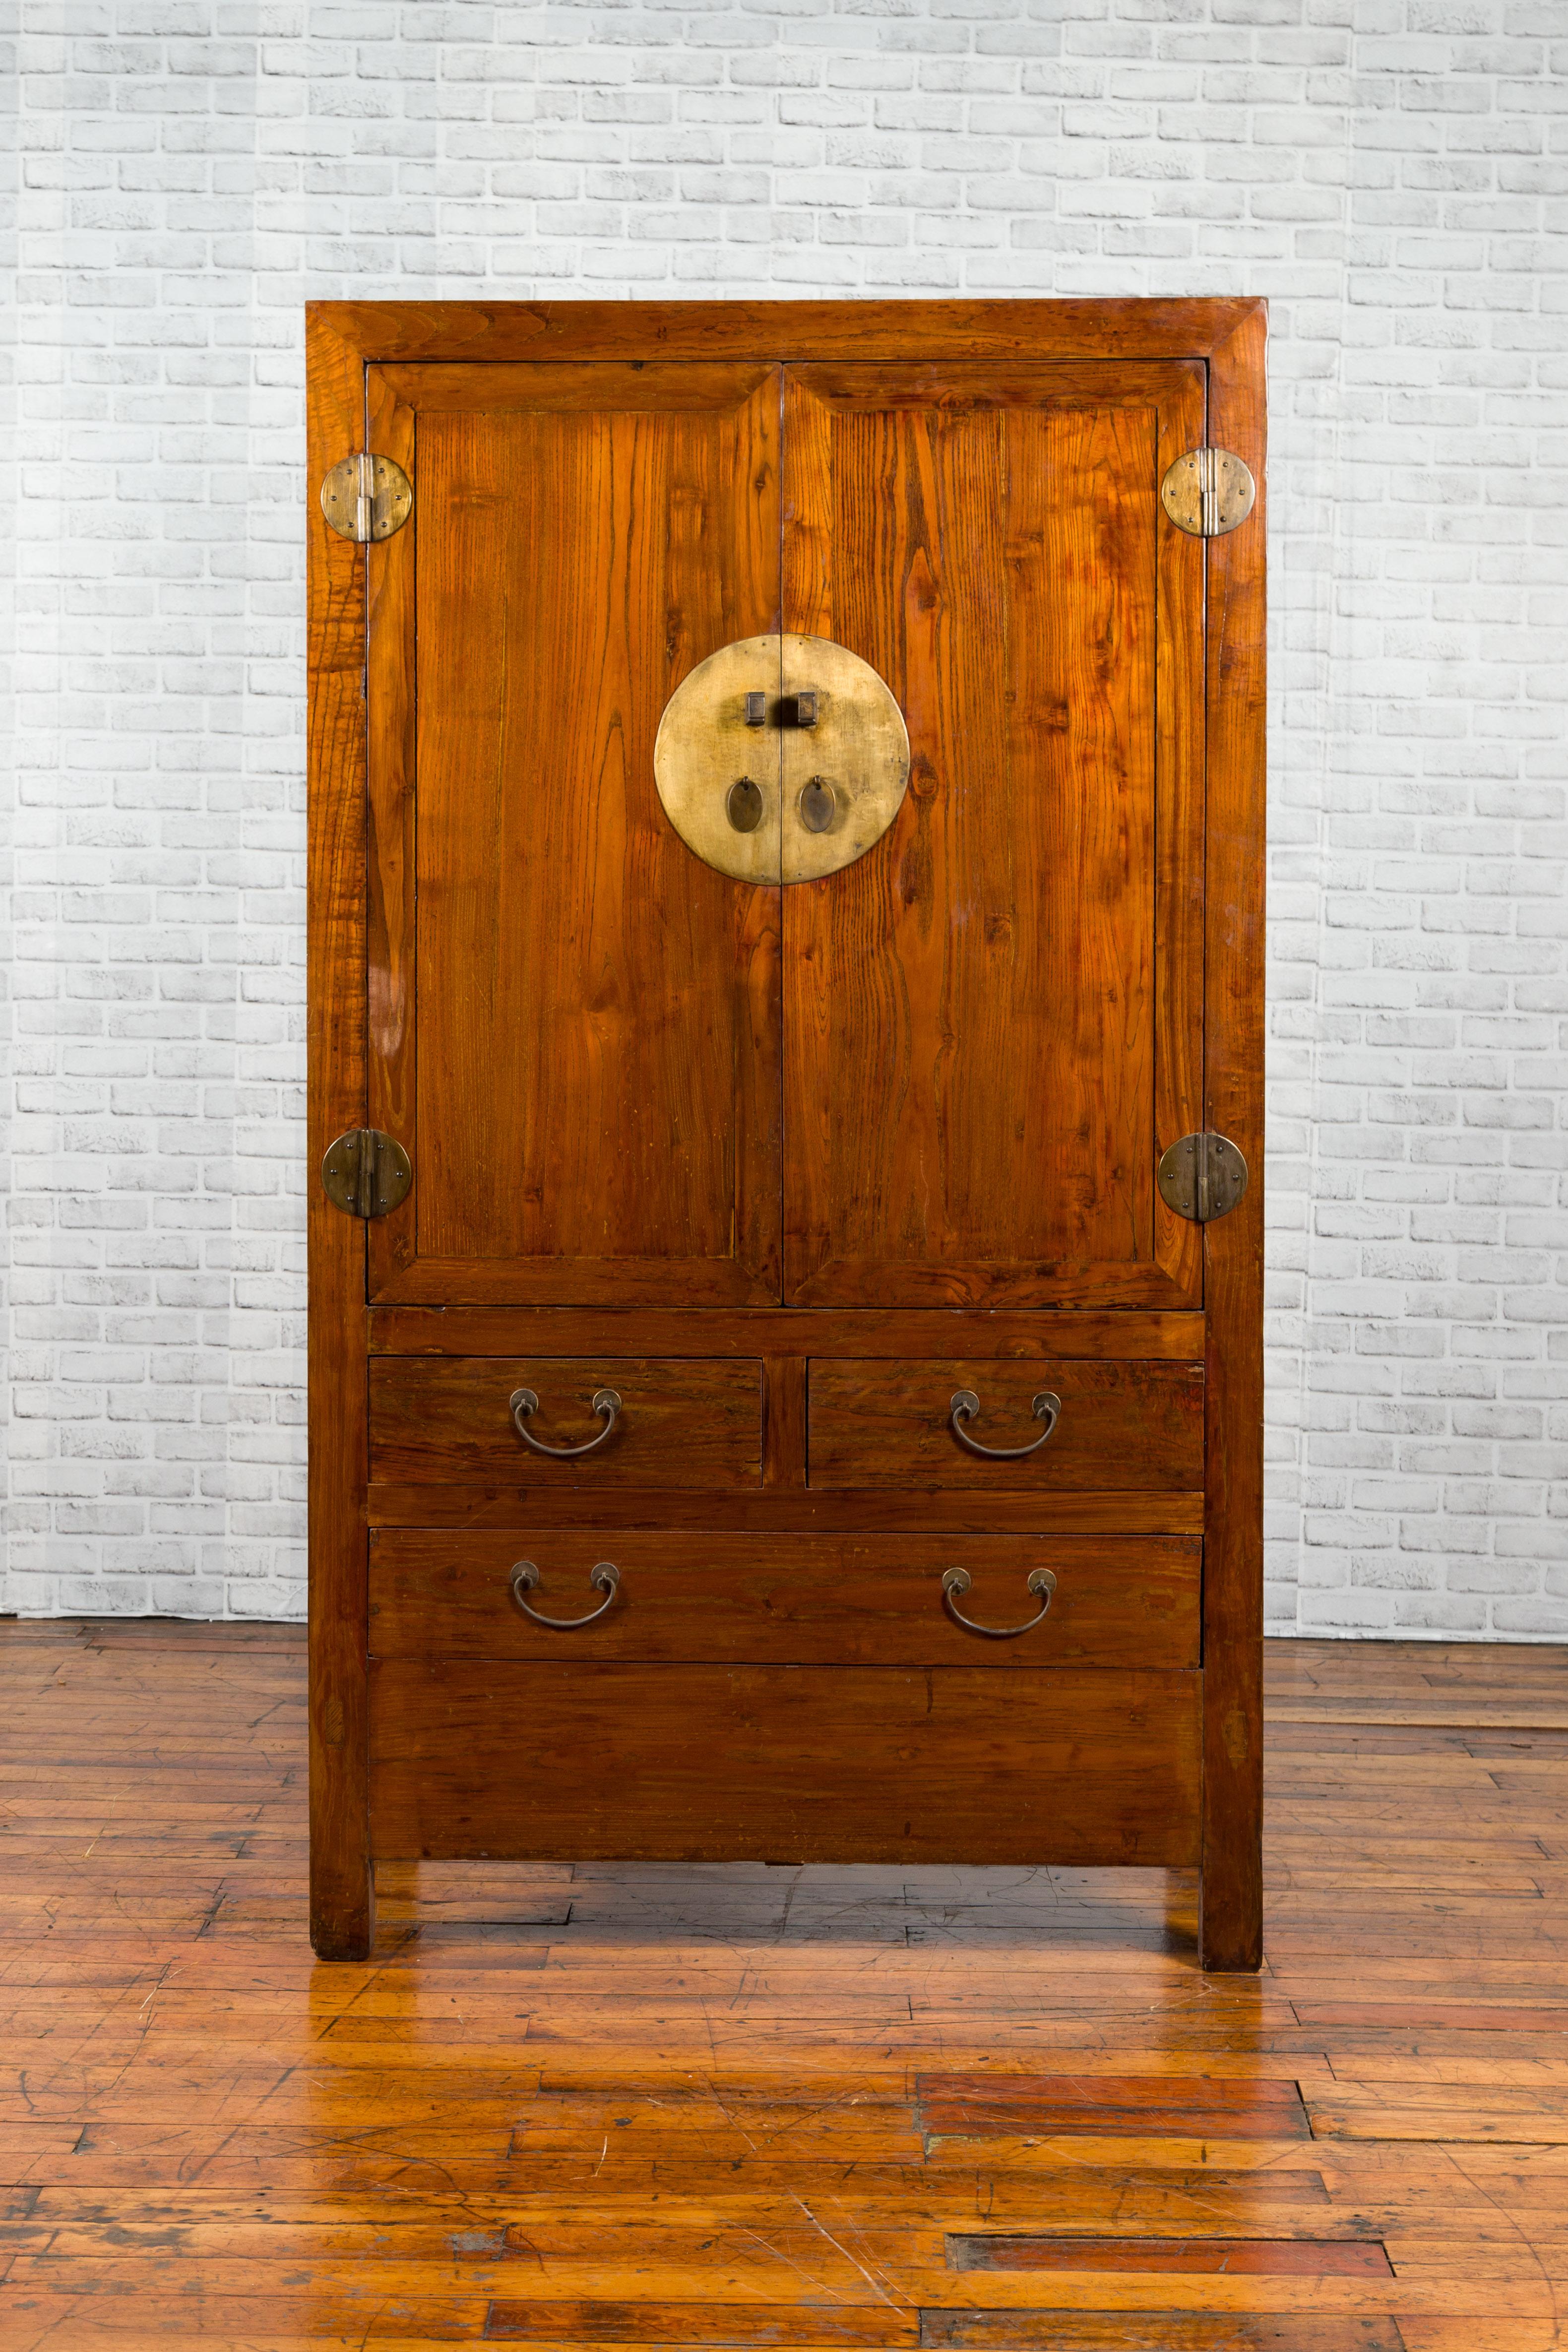 A Chinese Qing Dynasty period elm cabinet from the 19th century, with two doors, three drawers and brass hardware. Created in China during the Qing Dynasty, this cabinet features a linear silhouette perfectly complimenting the warmth of the elm